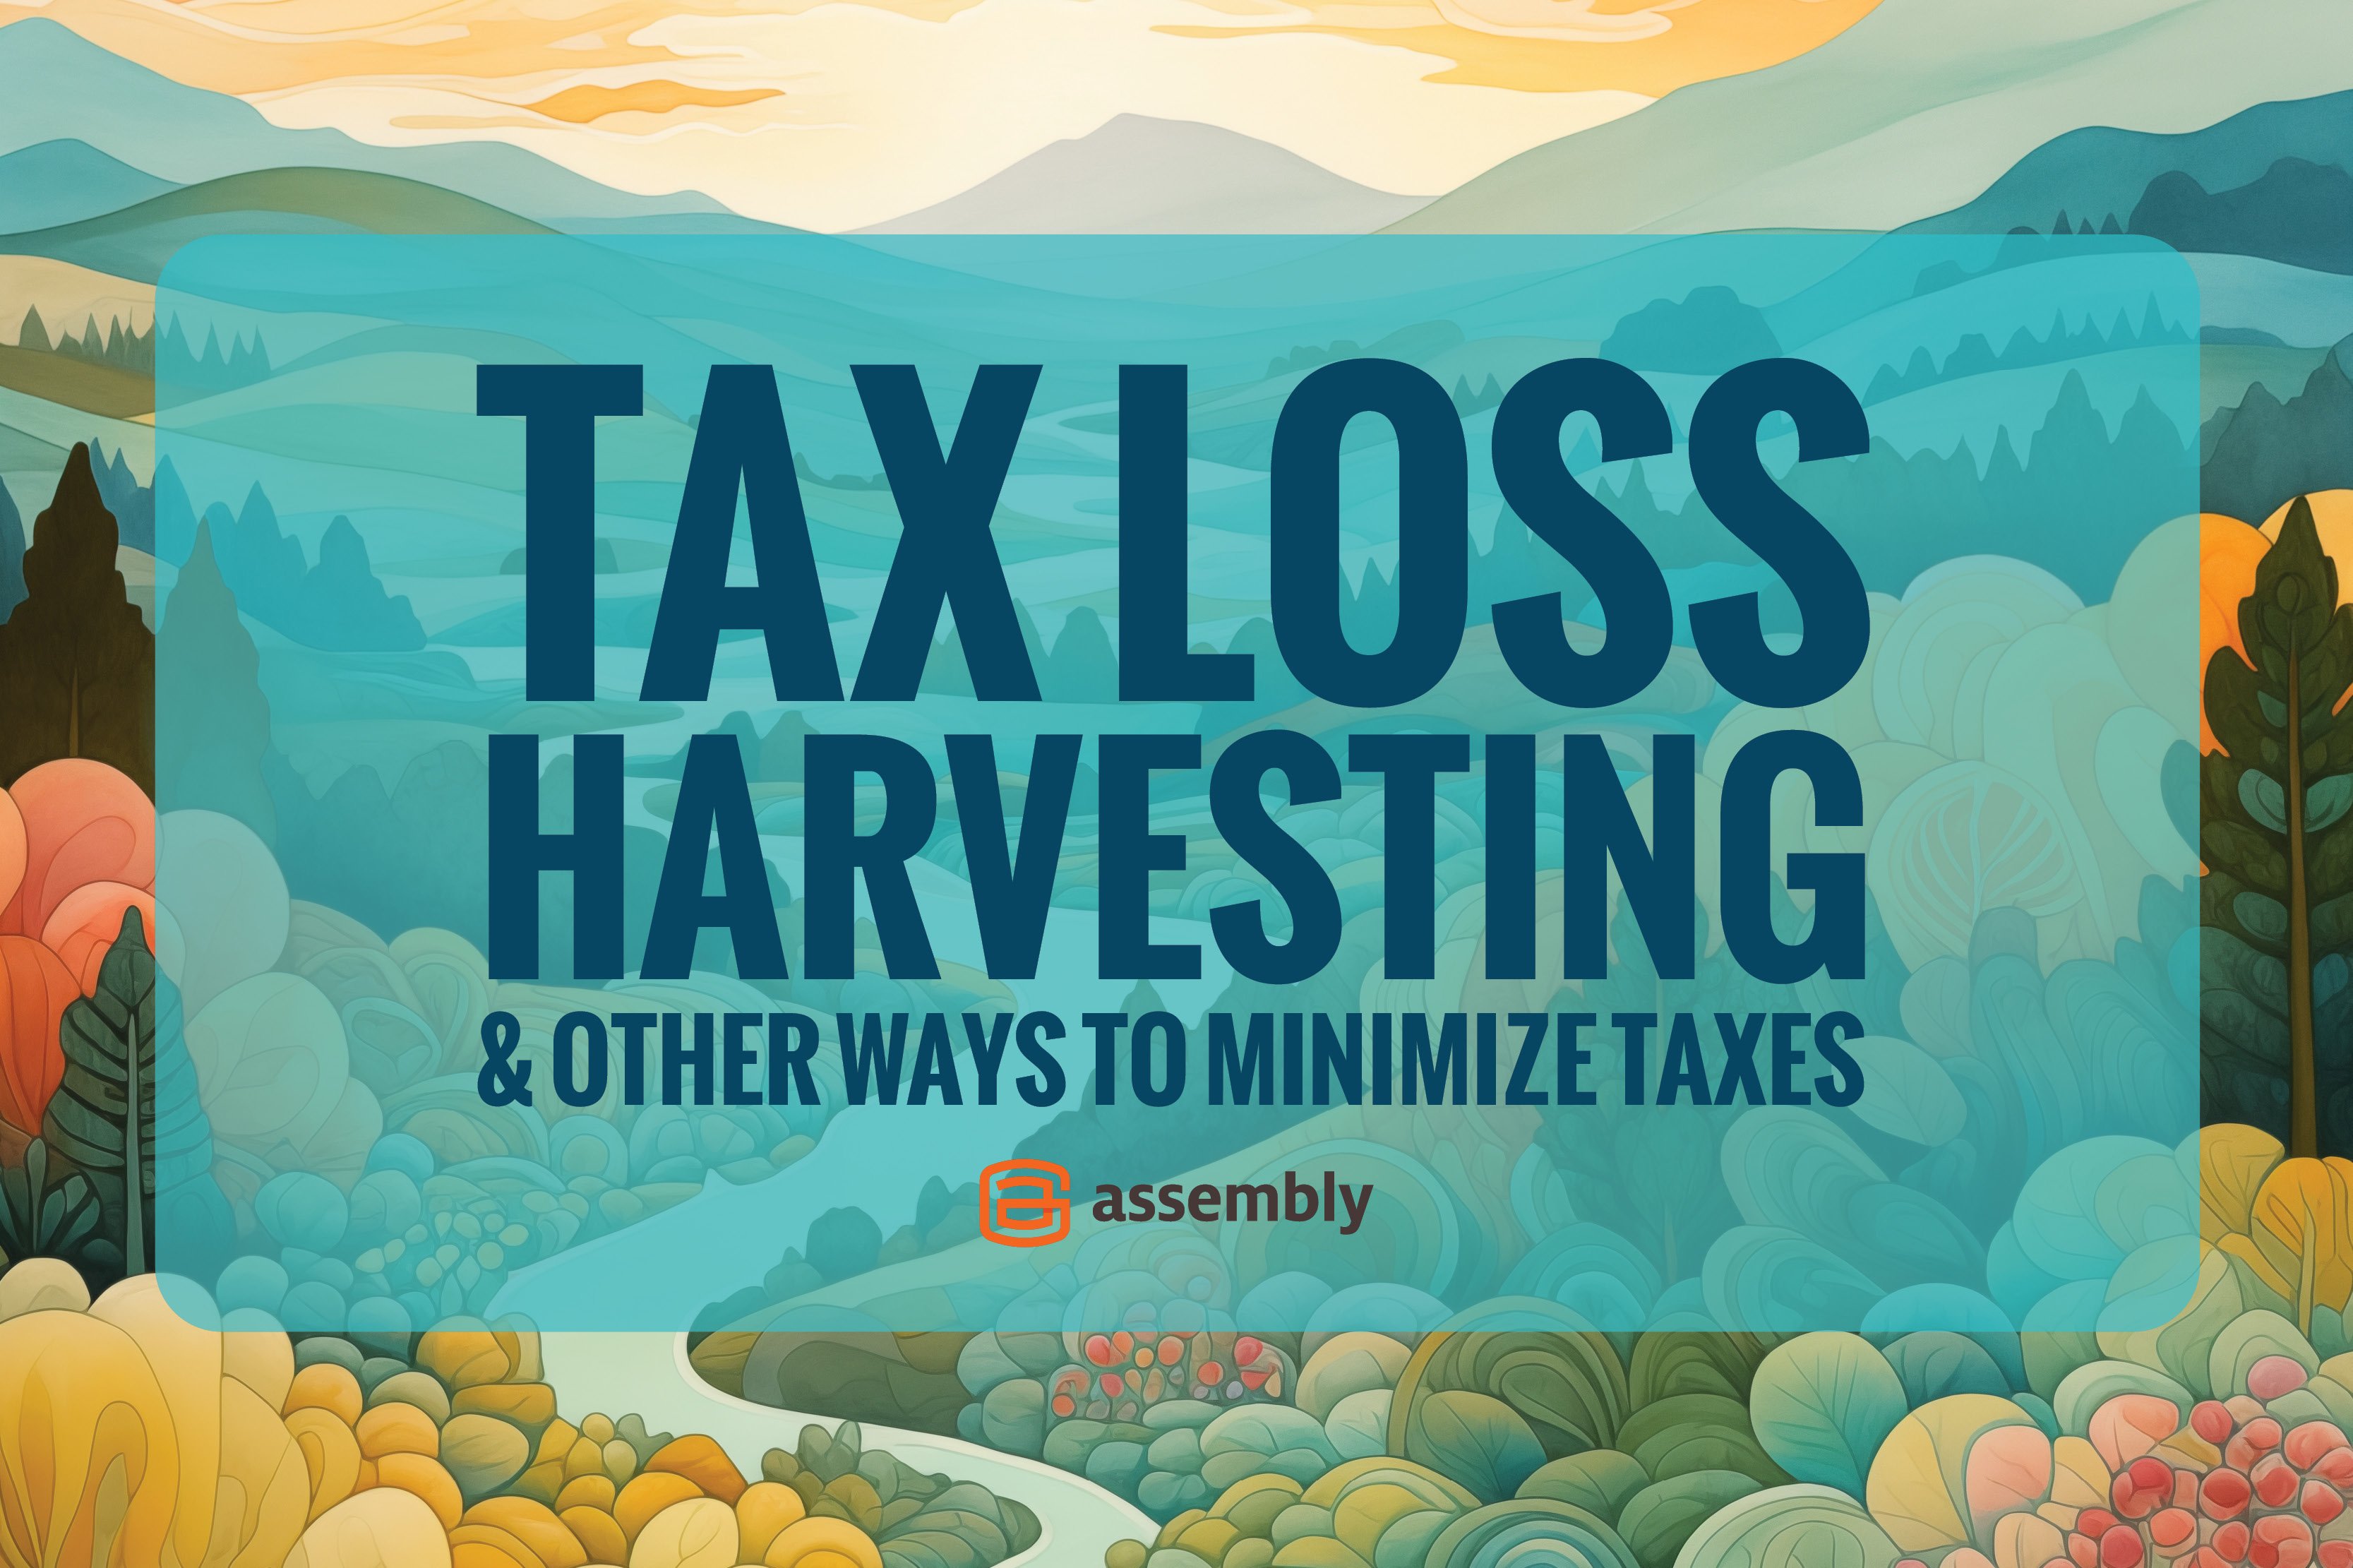 Minimize taxes with Tax Loss Harvesting